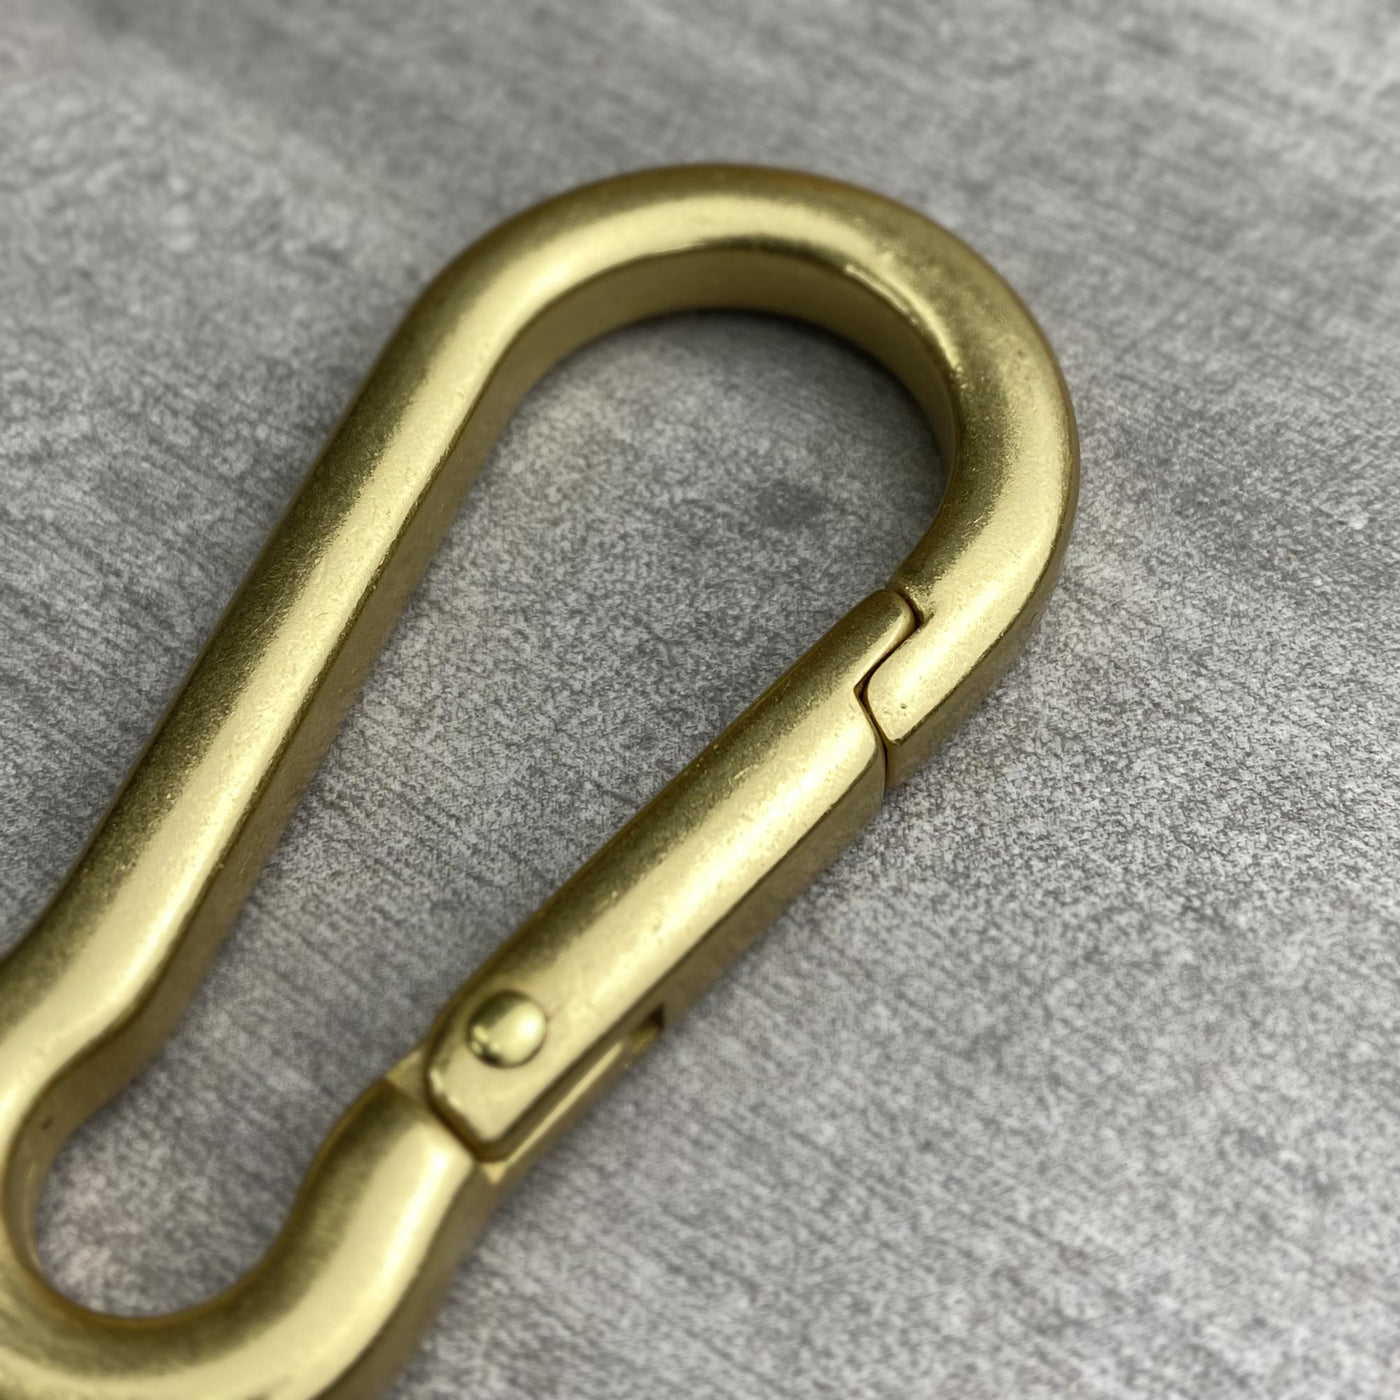 New solid brass carabiner with screw